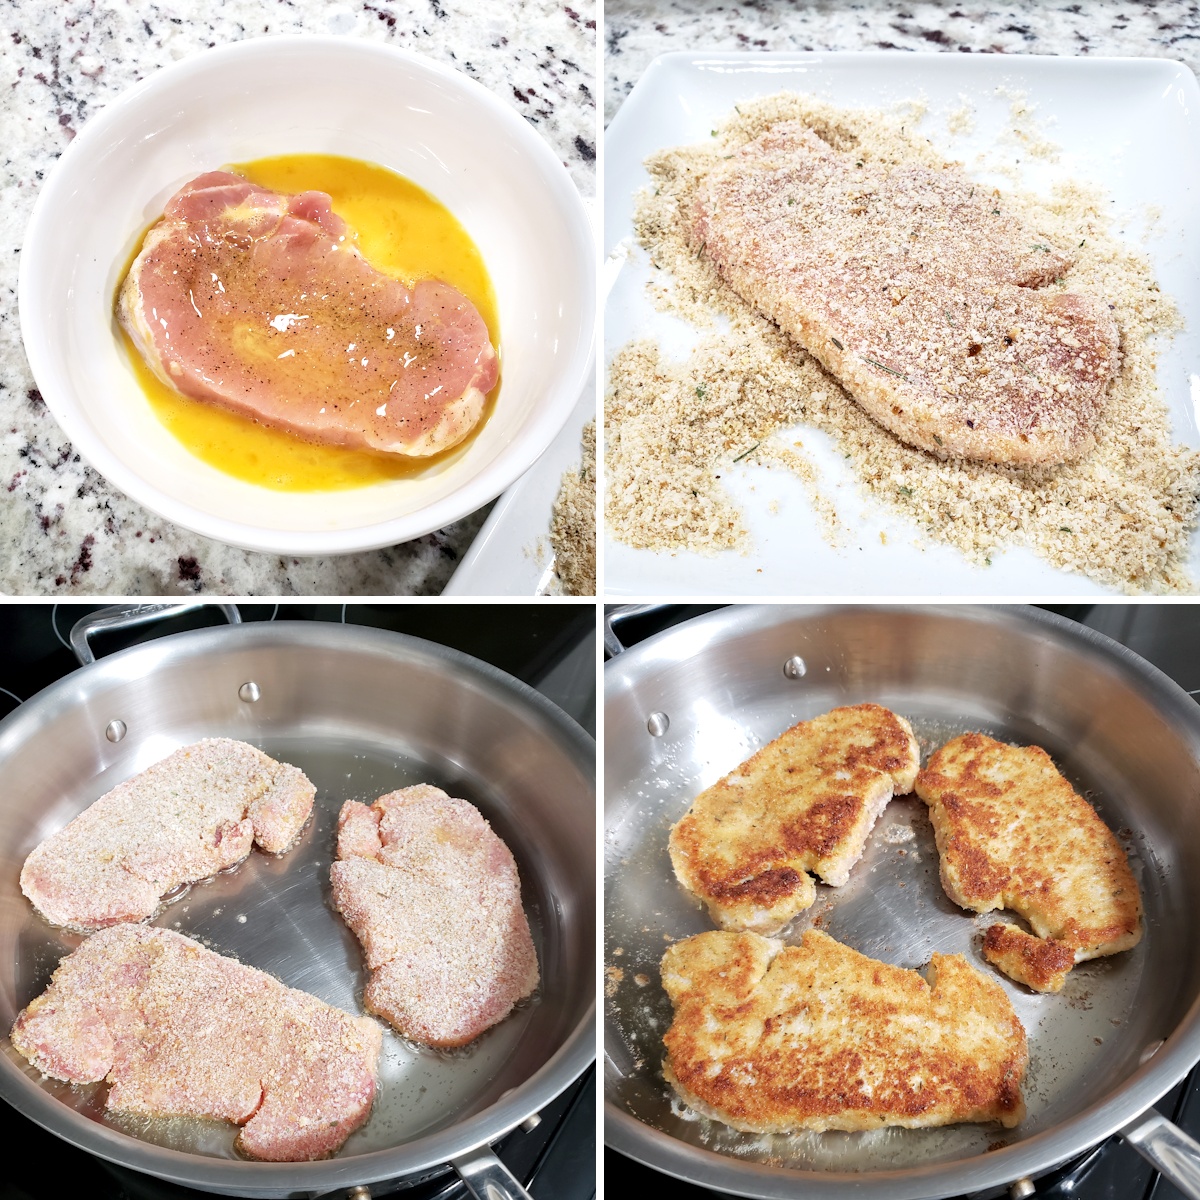 Breading and cooking pork chops in a saute pan.